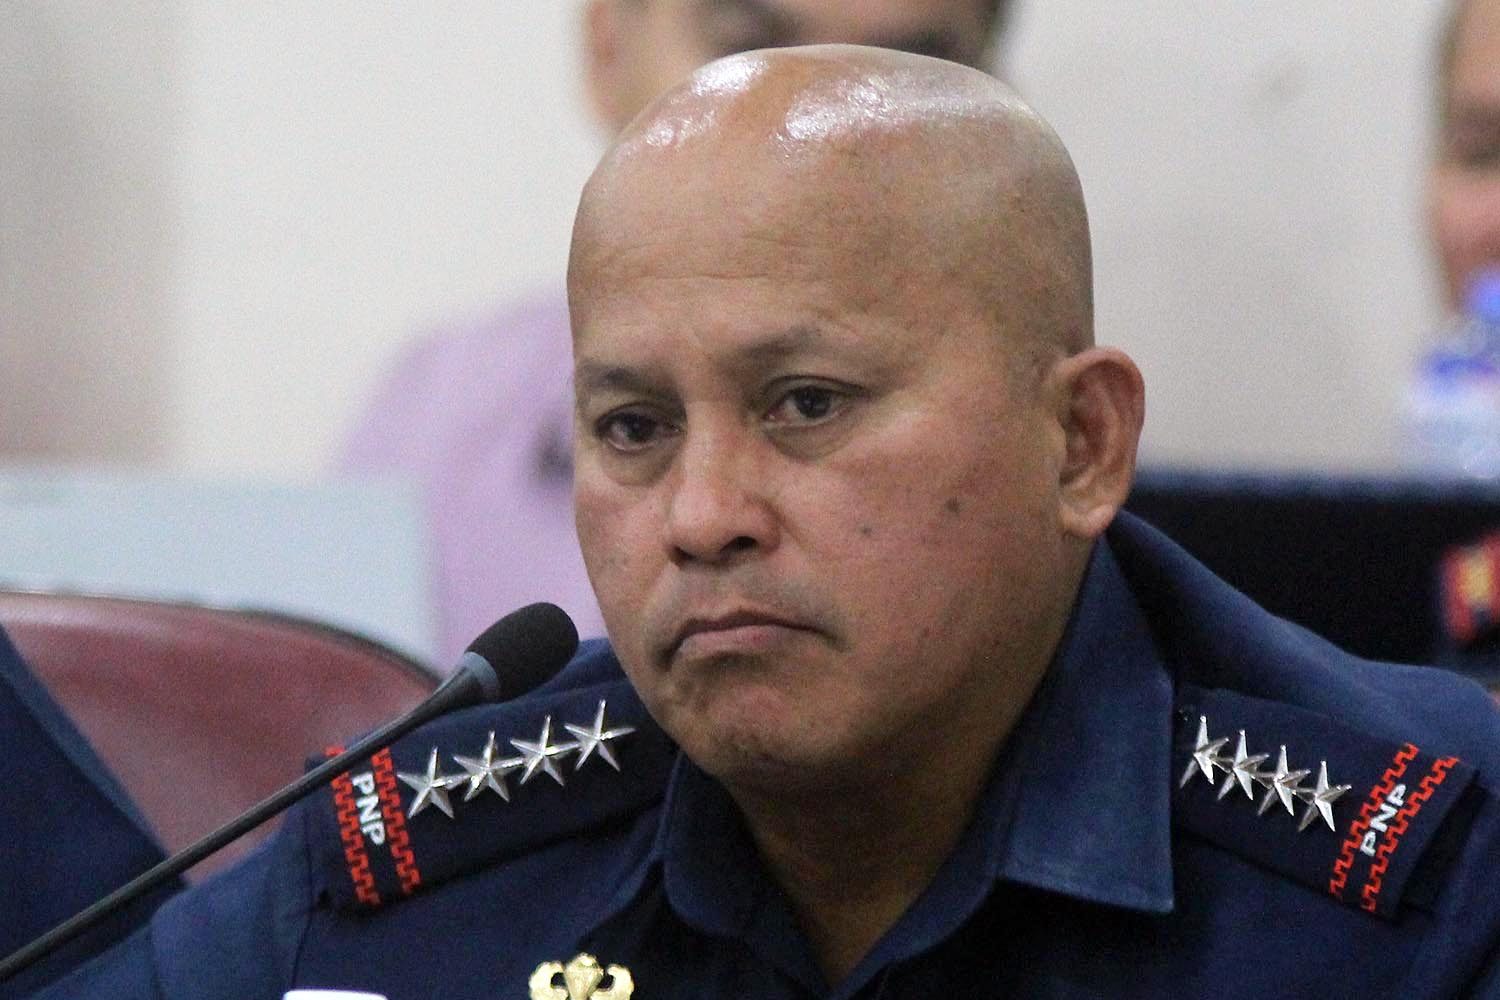 Intel operations, background checks on media ‘bordering on illegal’ – PNP chief